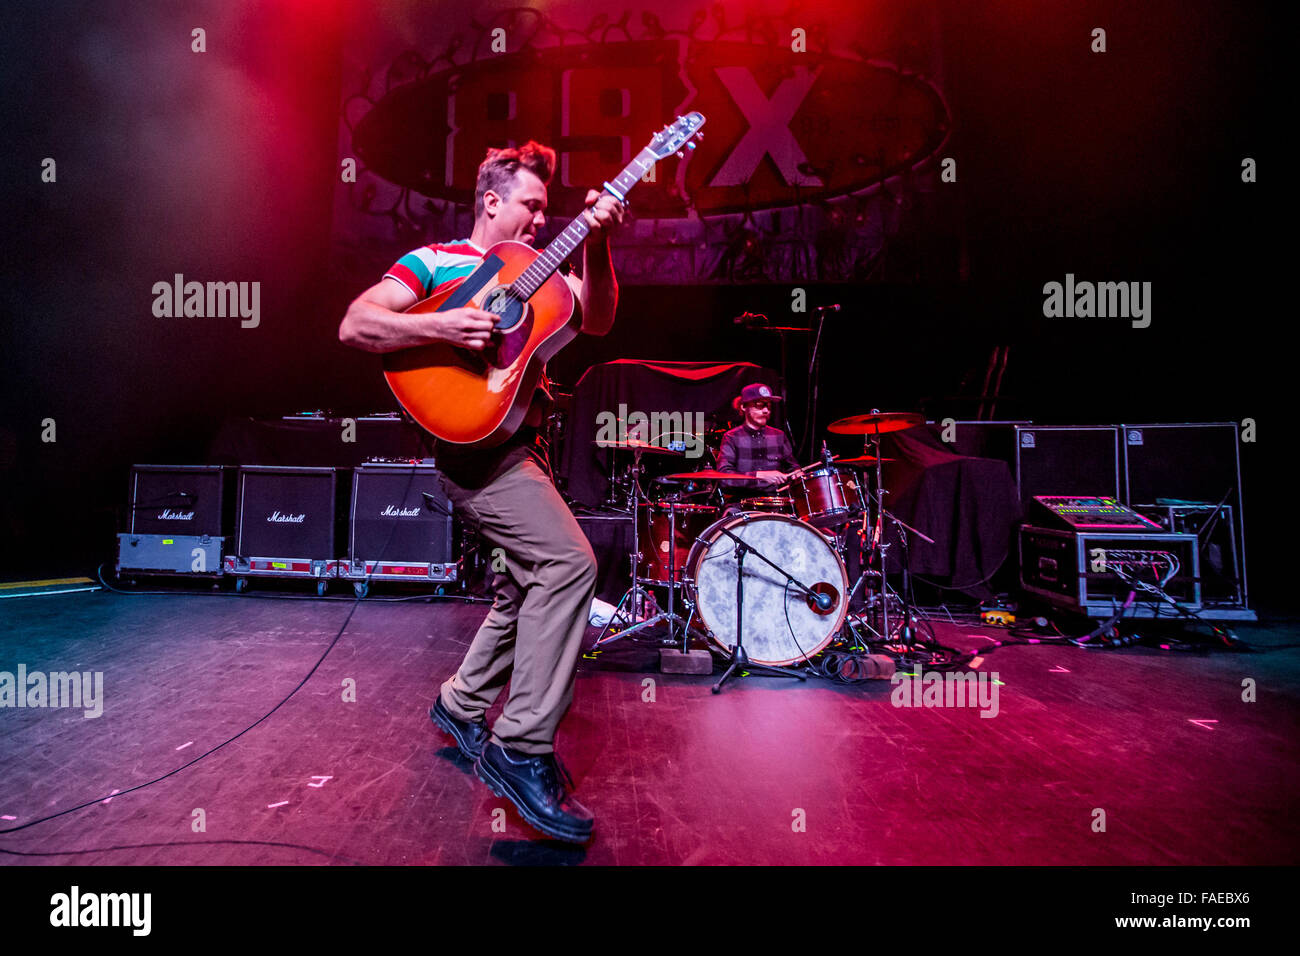 Detroit, Michigan, USA. 19th Dec, 2015. ASH BUCHHOLZ of USS (UBIQUITOUS SYNERGY SEEKER) performing on The Night 89X Stole Xmas Show at The Fillmore in Detroit, MI on December 19th 2015 © Marc Nader/ZUMA Wire/Alamy Live News Stock Photo